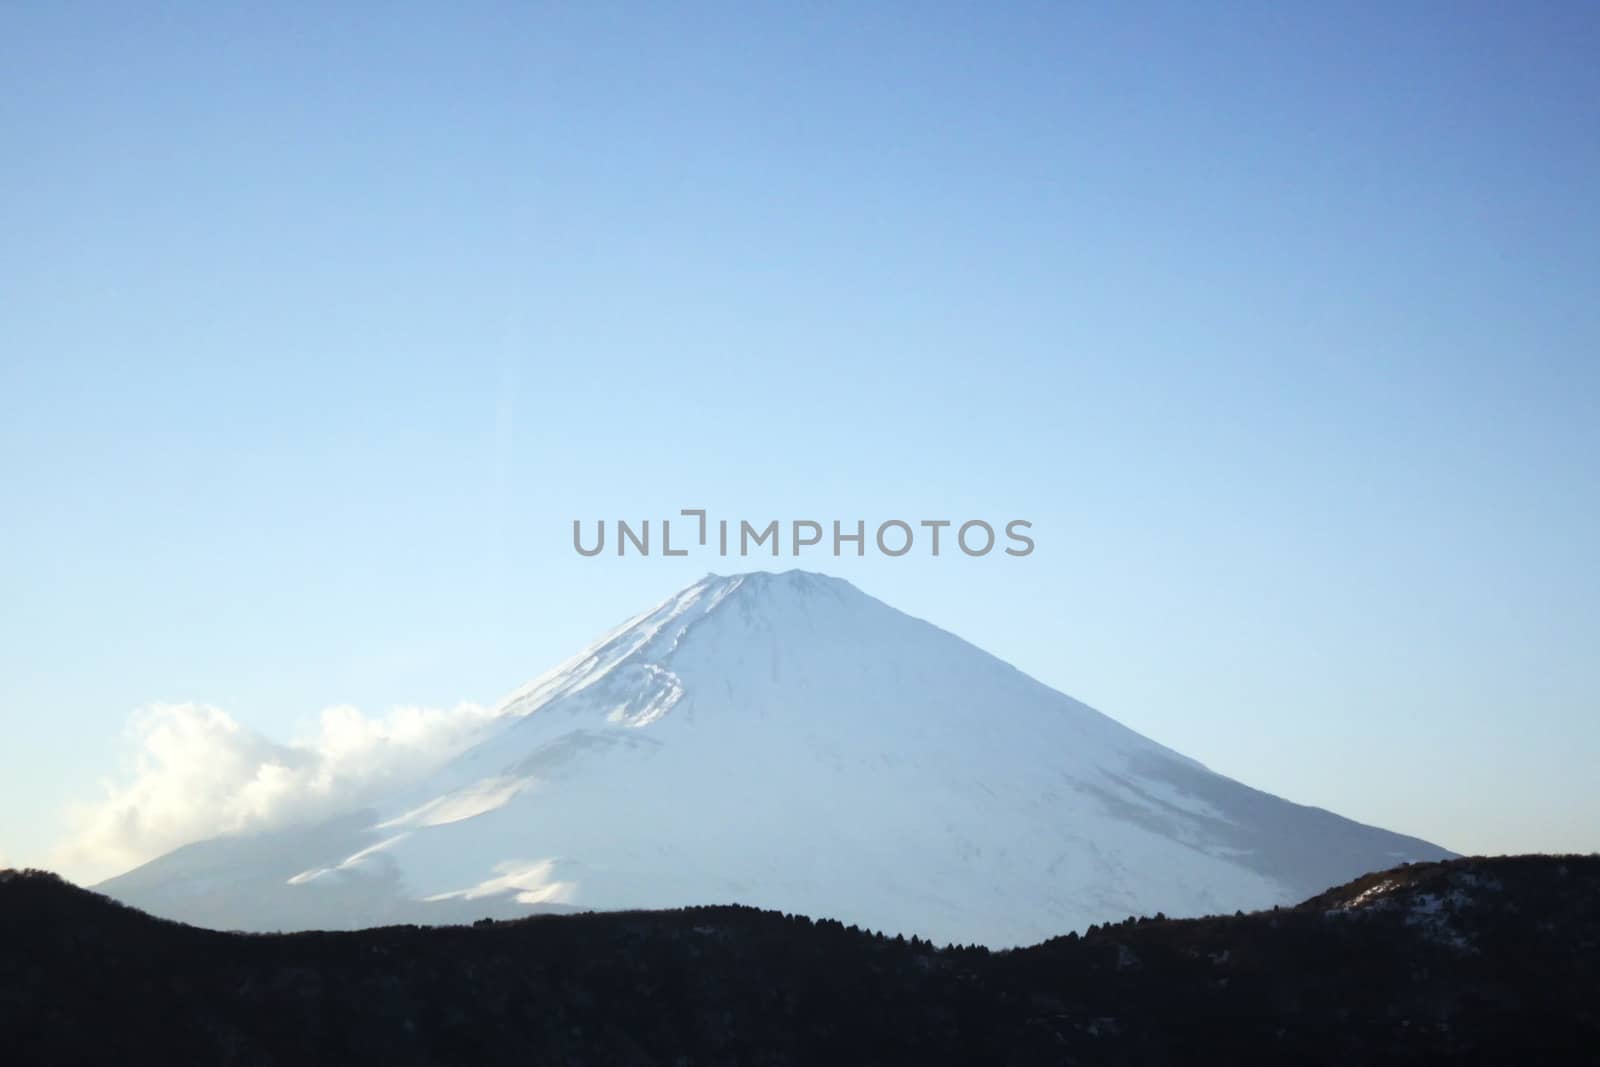 fuji mountain and blue sky bright background.